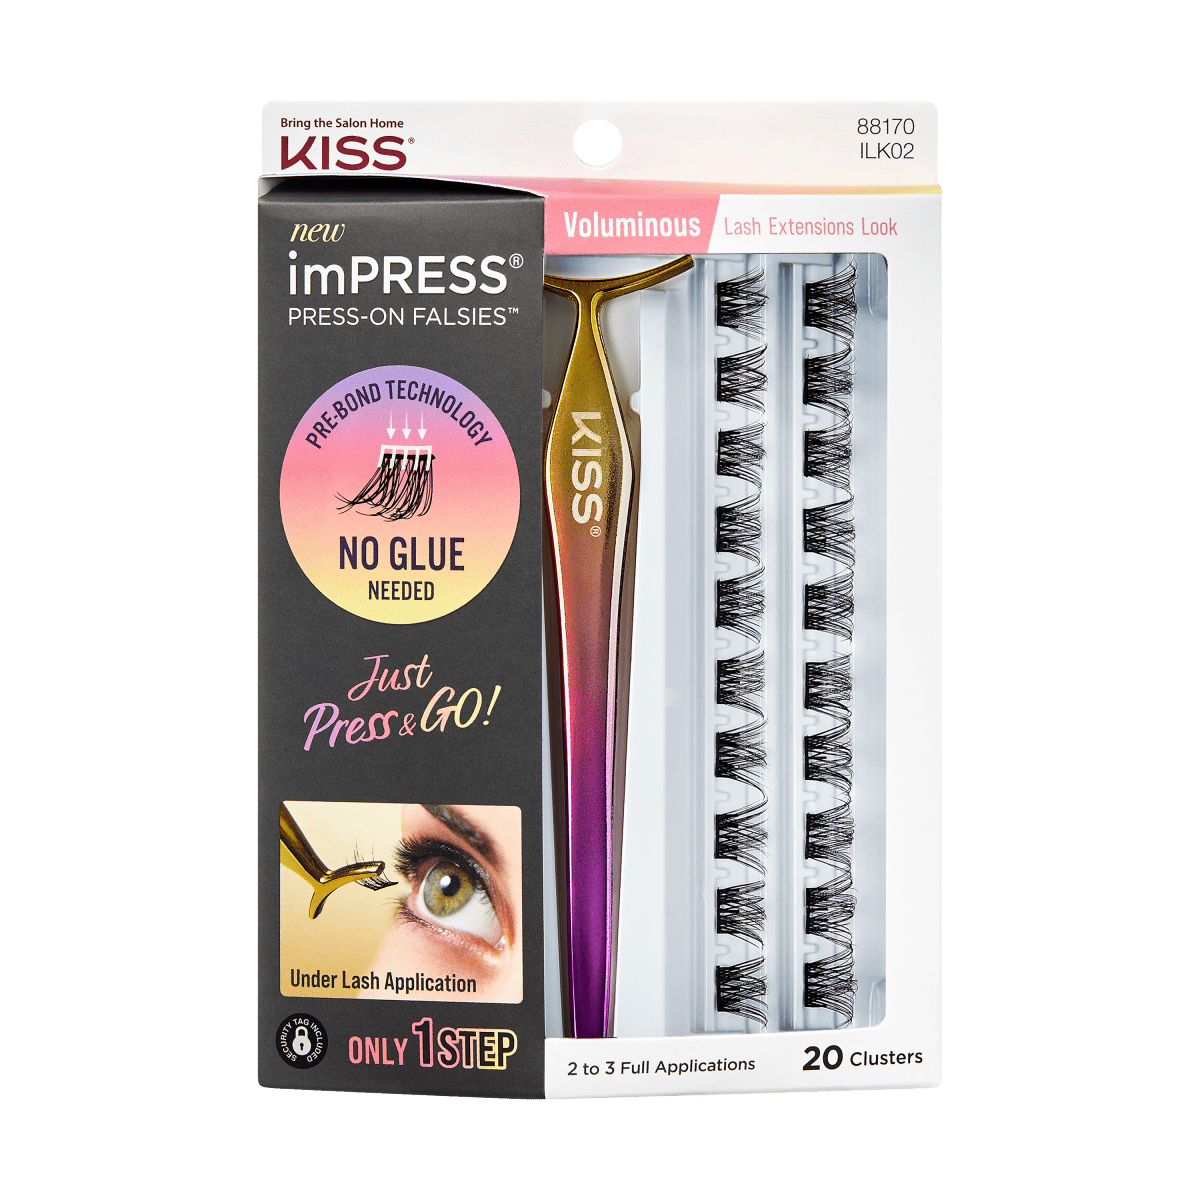 This packaging contains a set of imPRESS Beauty Falsies press on lashes kit for easy application with no glue needed.